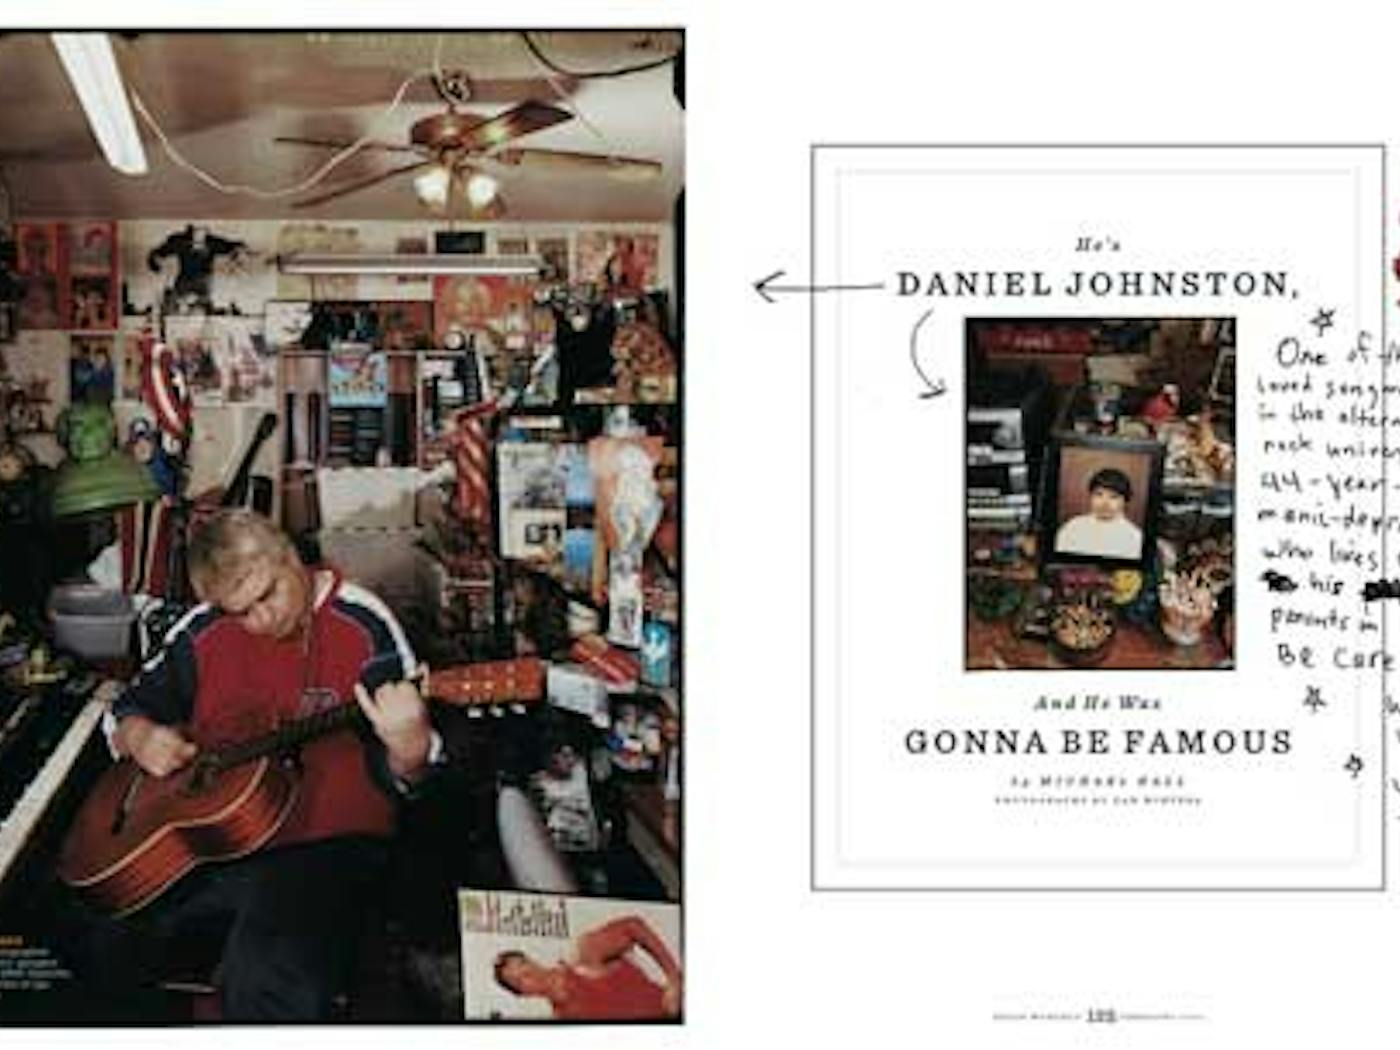 He S Daniel Johnston And He Was Gonna Be Famous Texas Monthly